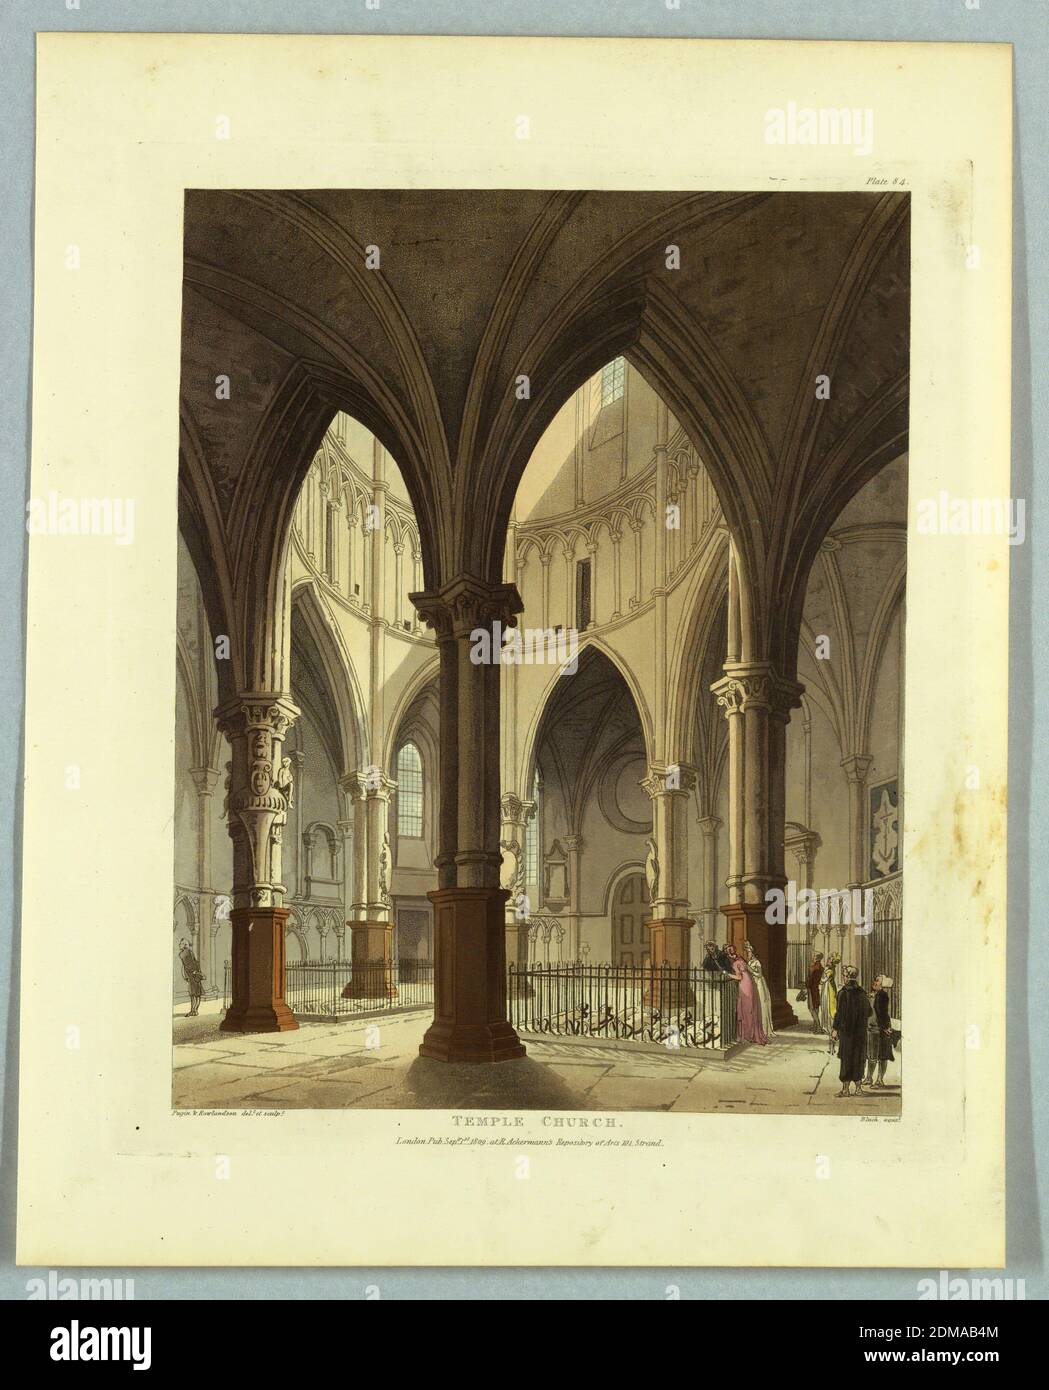 Temple Church, from 'Ackermann's Repository', Thomas Rowlandson, British, 1756–1827, Augustus Charles Pugin, French, active Great Britain, ca. 1762–1832, John Bluck, British, 1791–1832, Aquatint, brush and watercolor on paper, Interior of an early Gothic church. A few men and women sightseeing. Three look over a fenc at funerary statues on the floor. Title, artists', and publisher's names below., Europe, London, England, 1809, Print Stock Photo